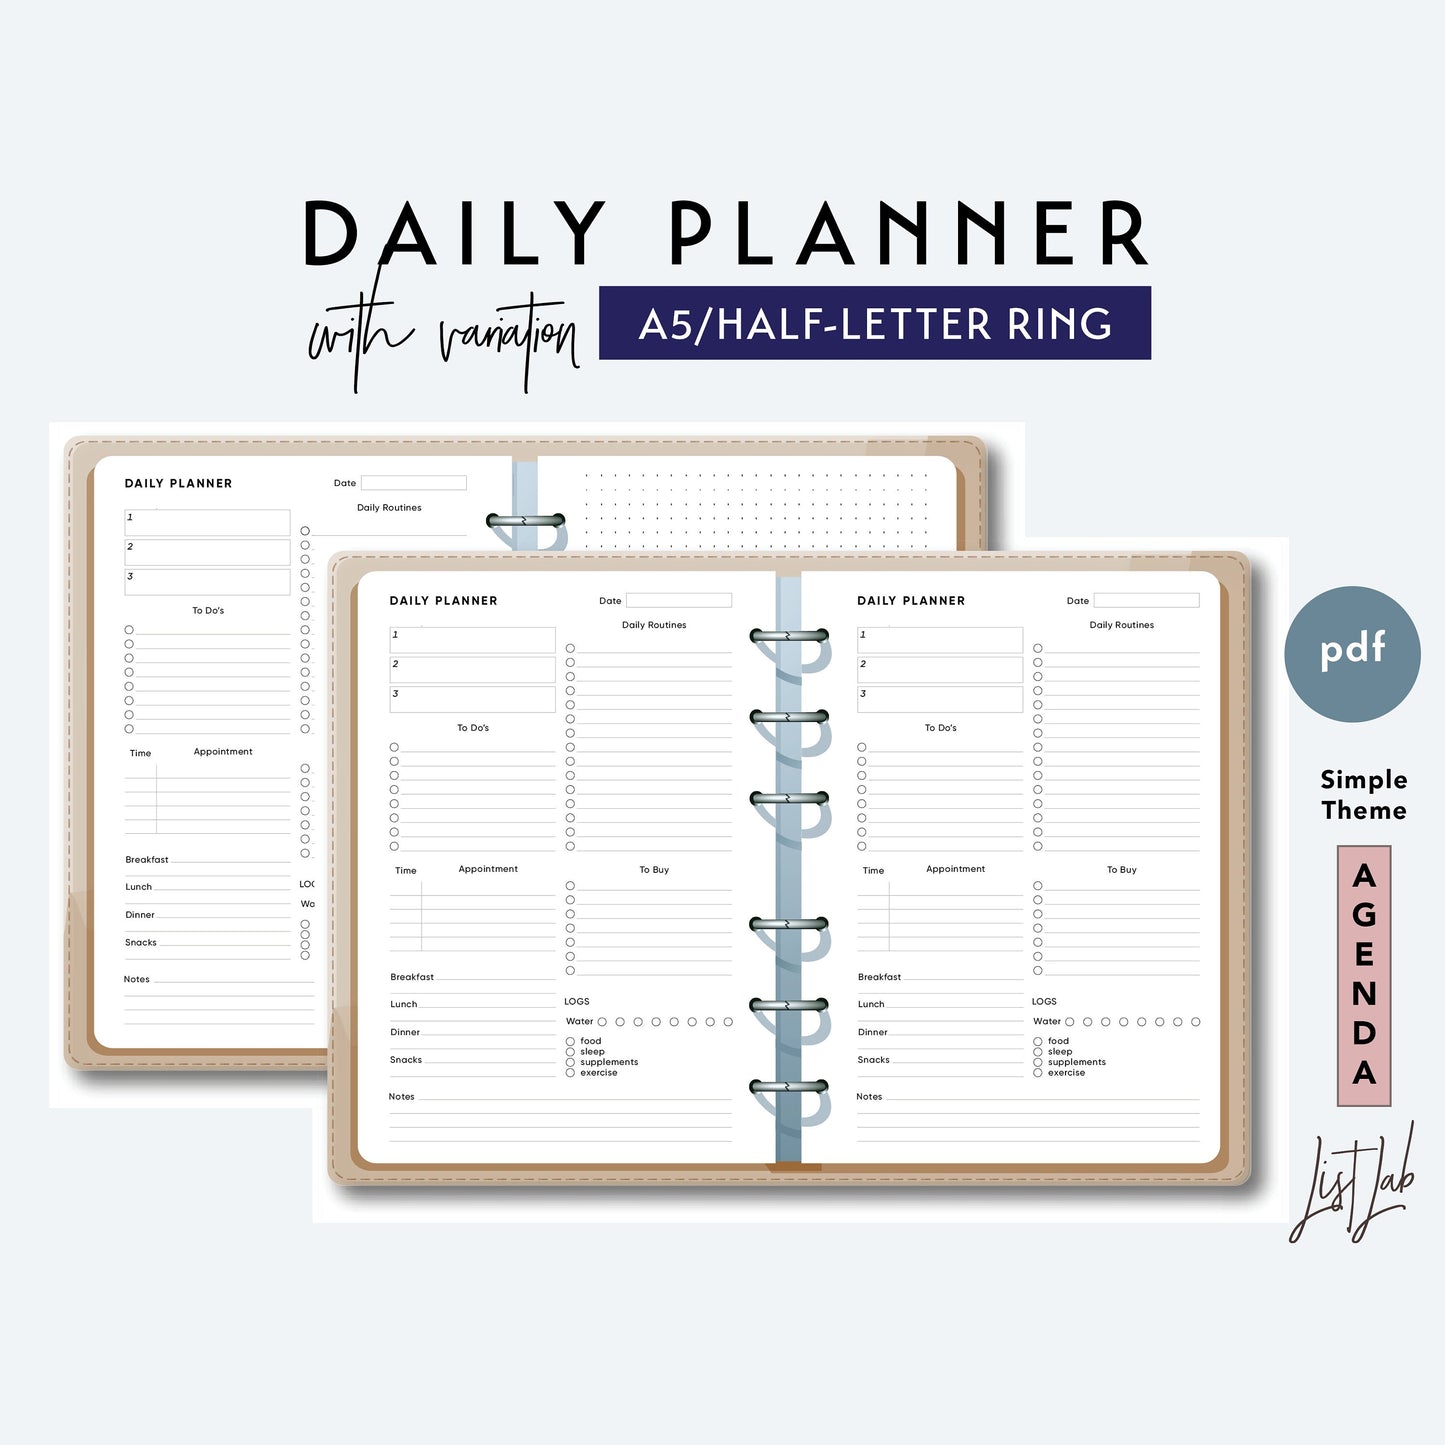 A5 and Half-Letter Ring DAILY PLANNER with Variation Printable Set